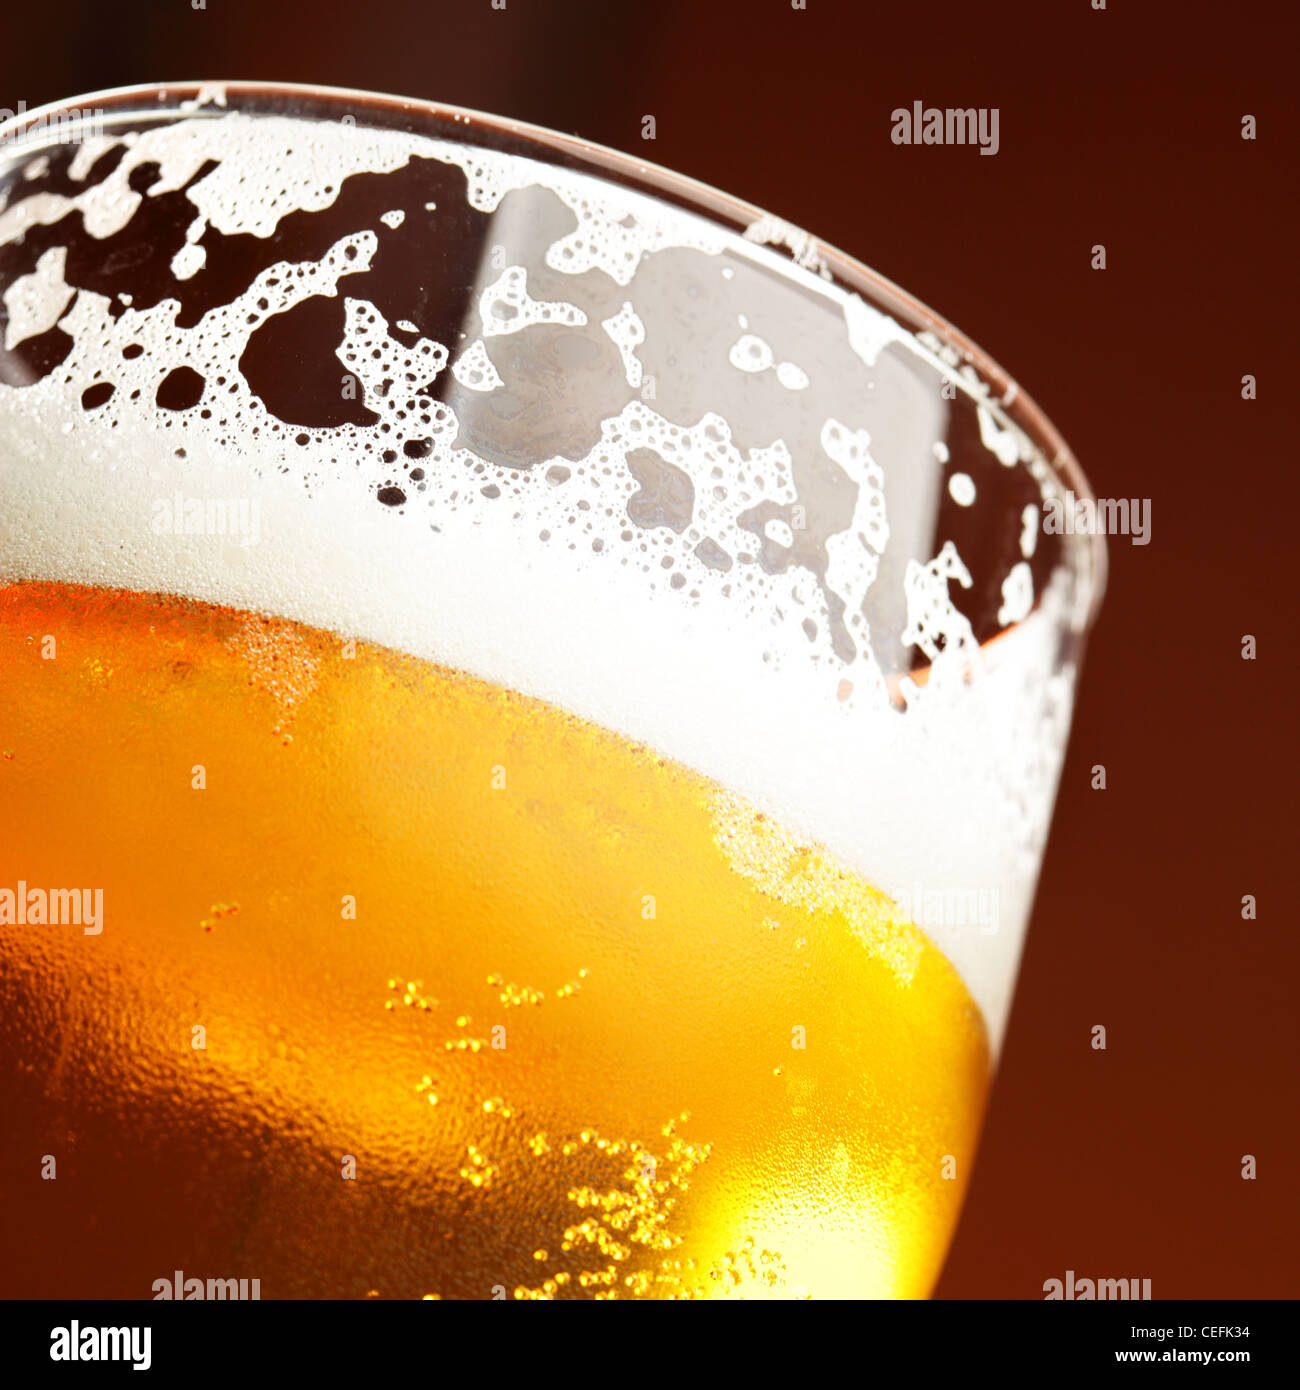 Close up of beer glass with froth Stock Photo